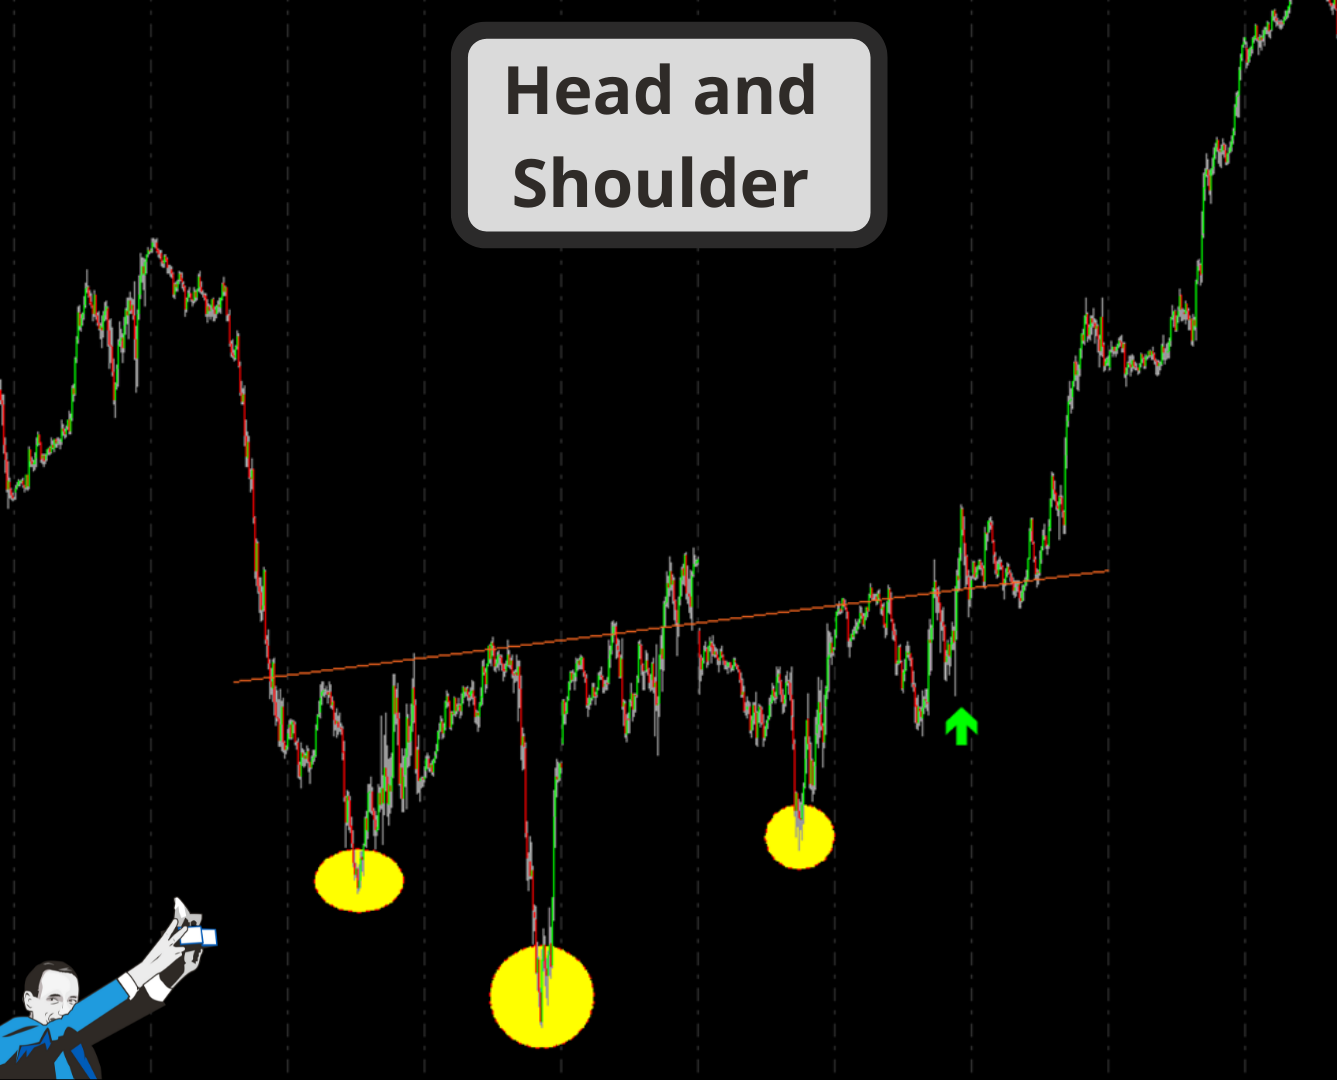 head and shoulder trading price pattern